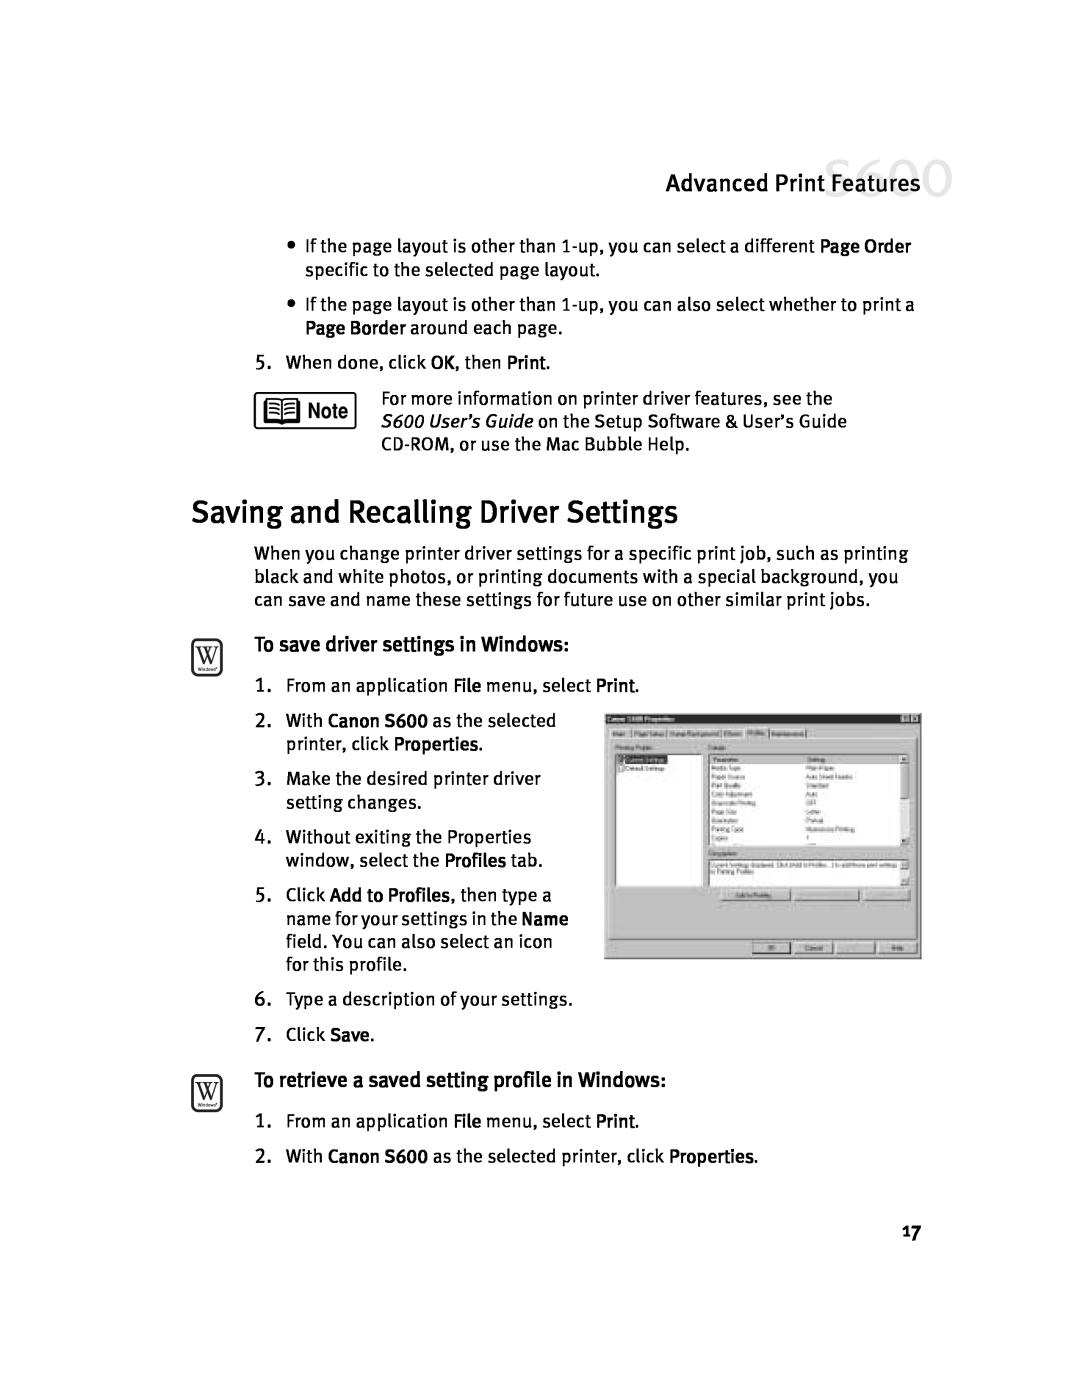 Canon S600 quick start Saving and Recalling Driver Settings, To save driver settings in Windows, Advanced Print Features 